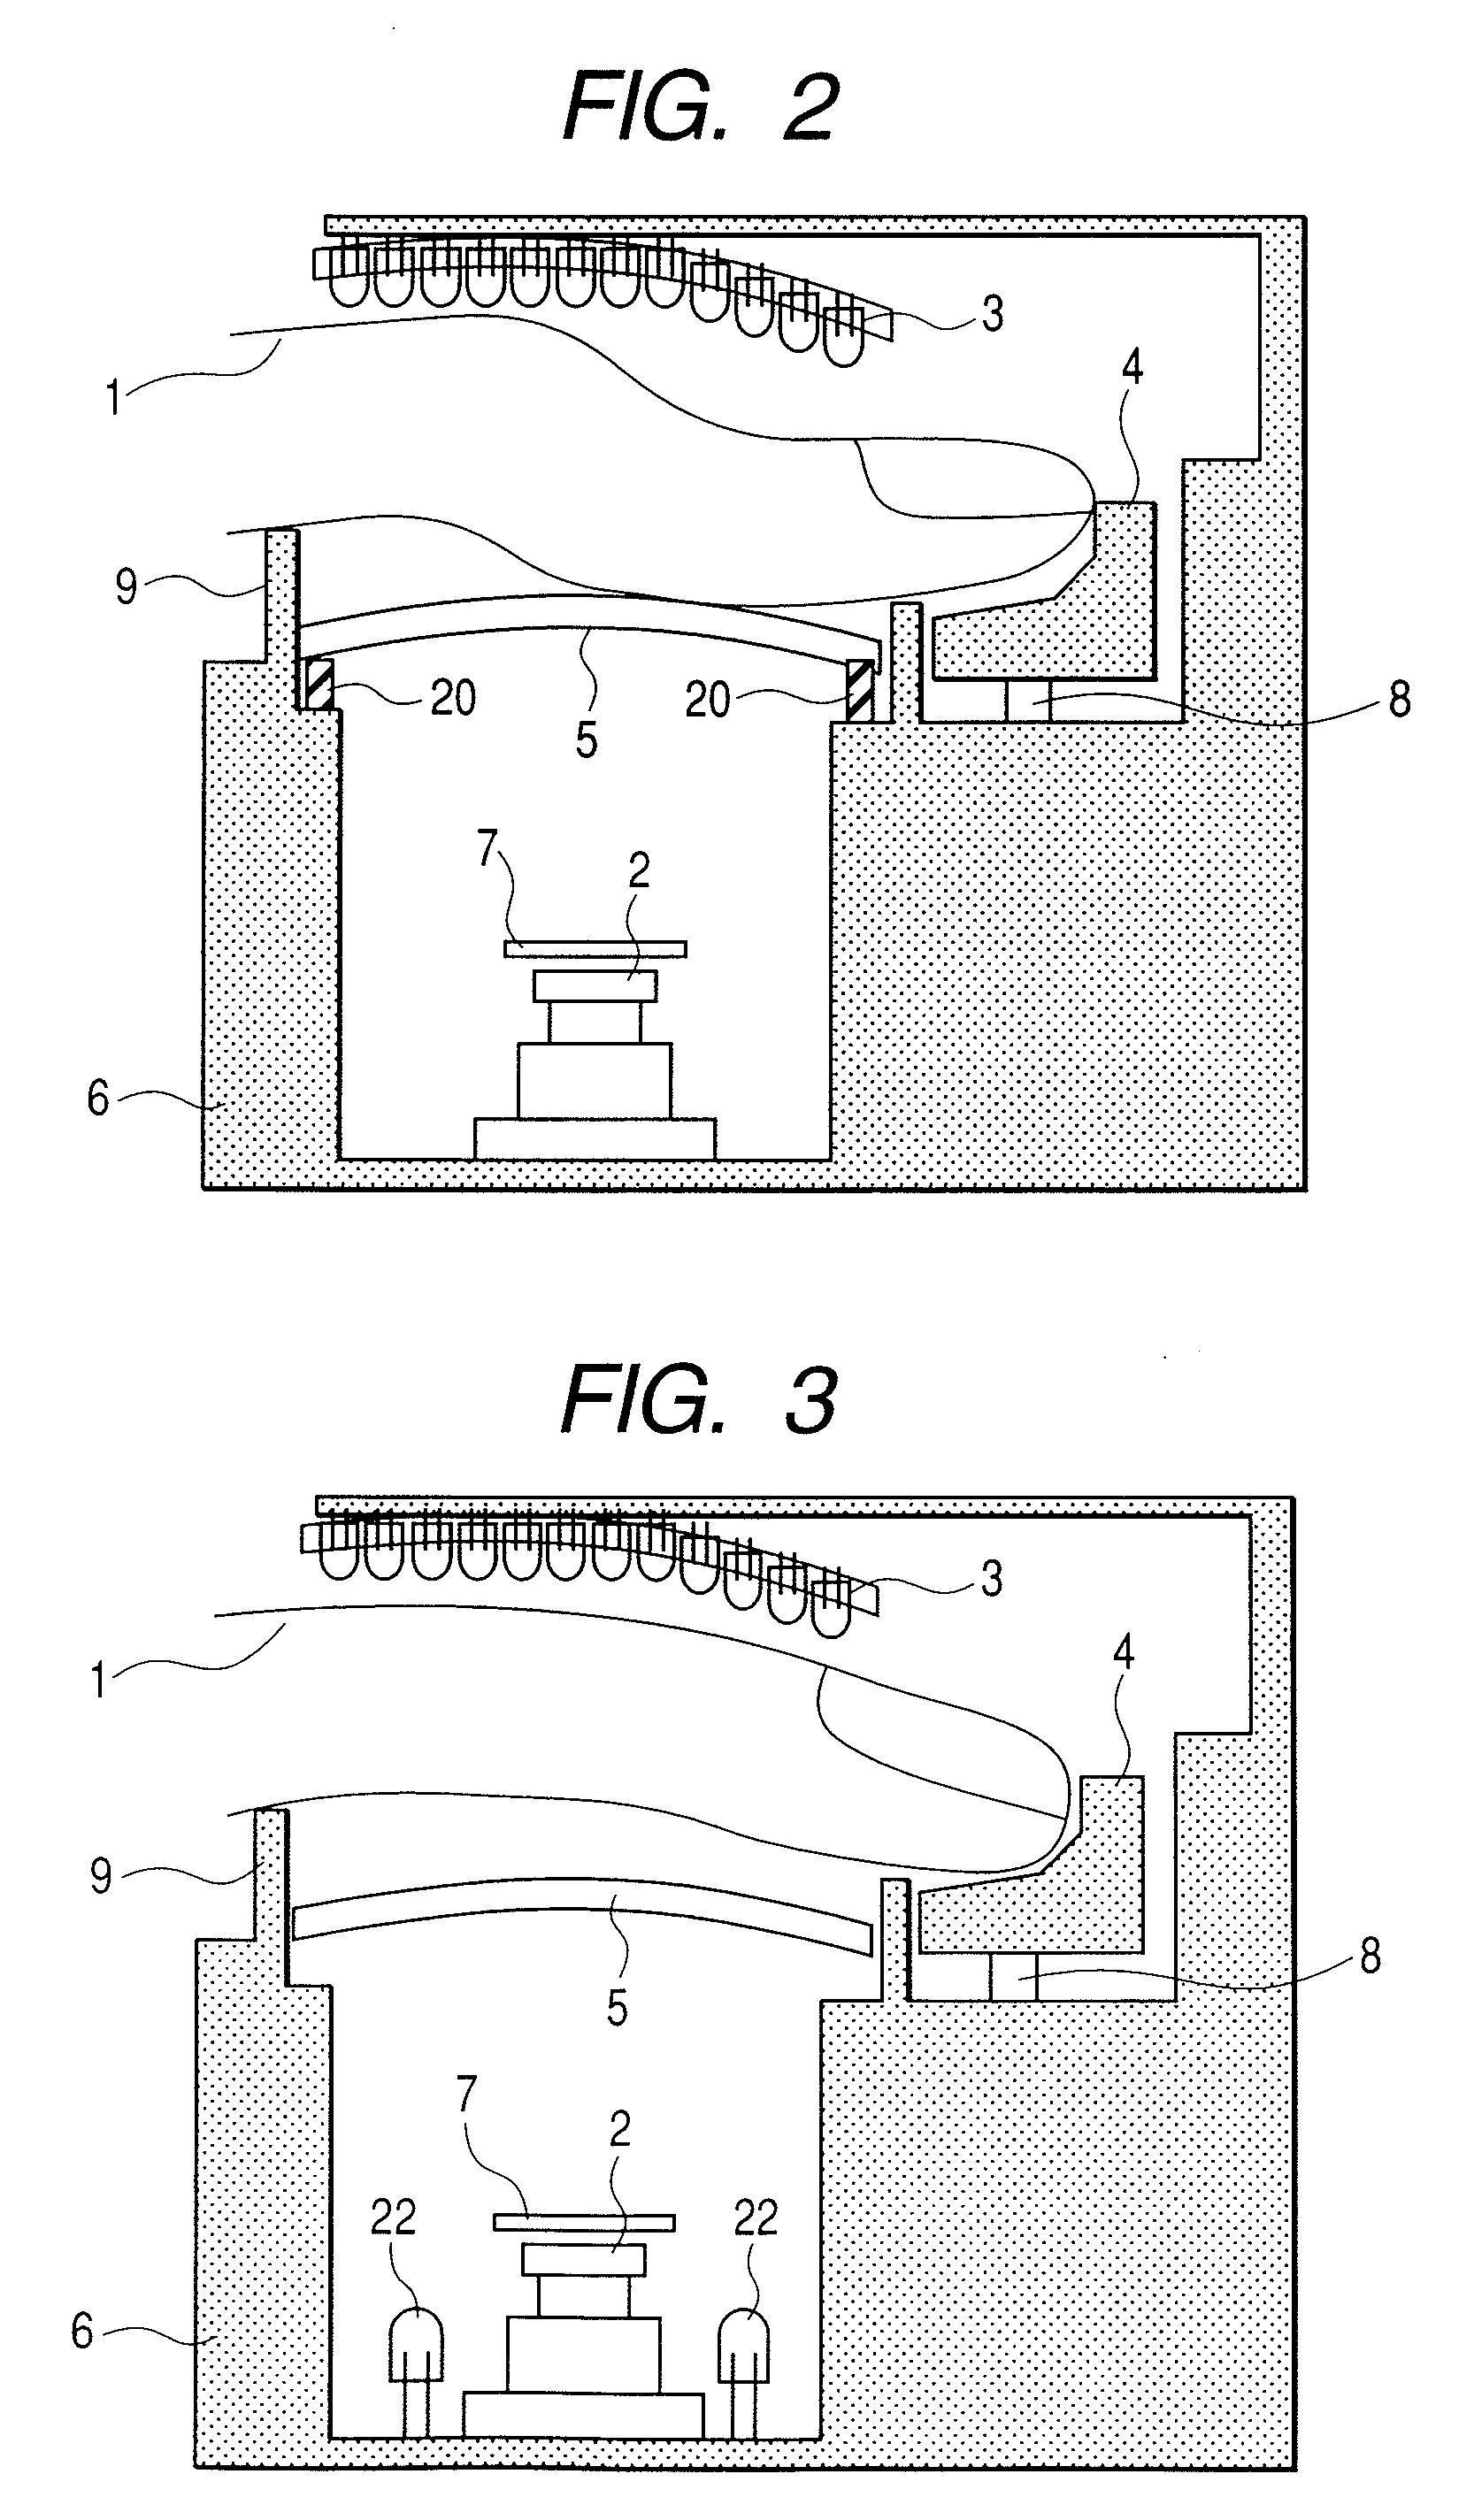 Personal identification device and method